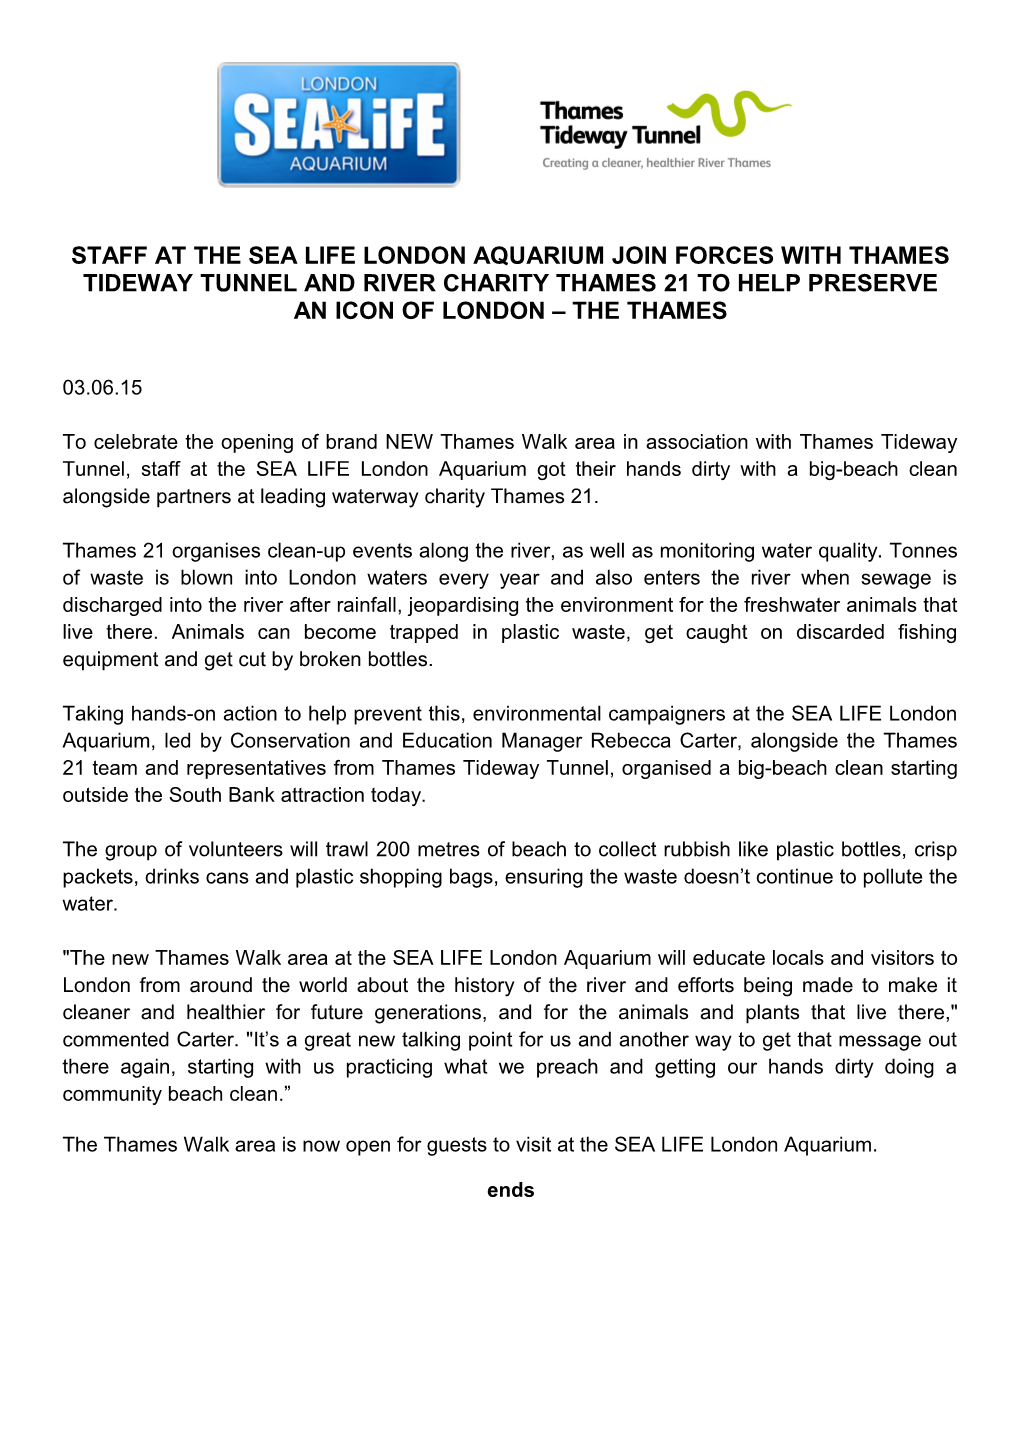 Staff at the Sea Life London Aquarium Join Forces with Thames Tideway Tunnel and River